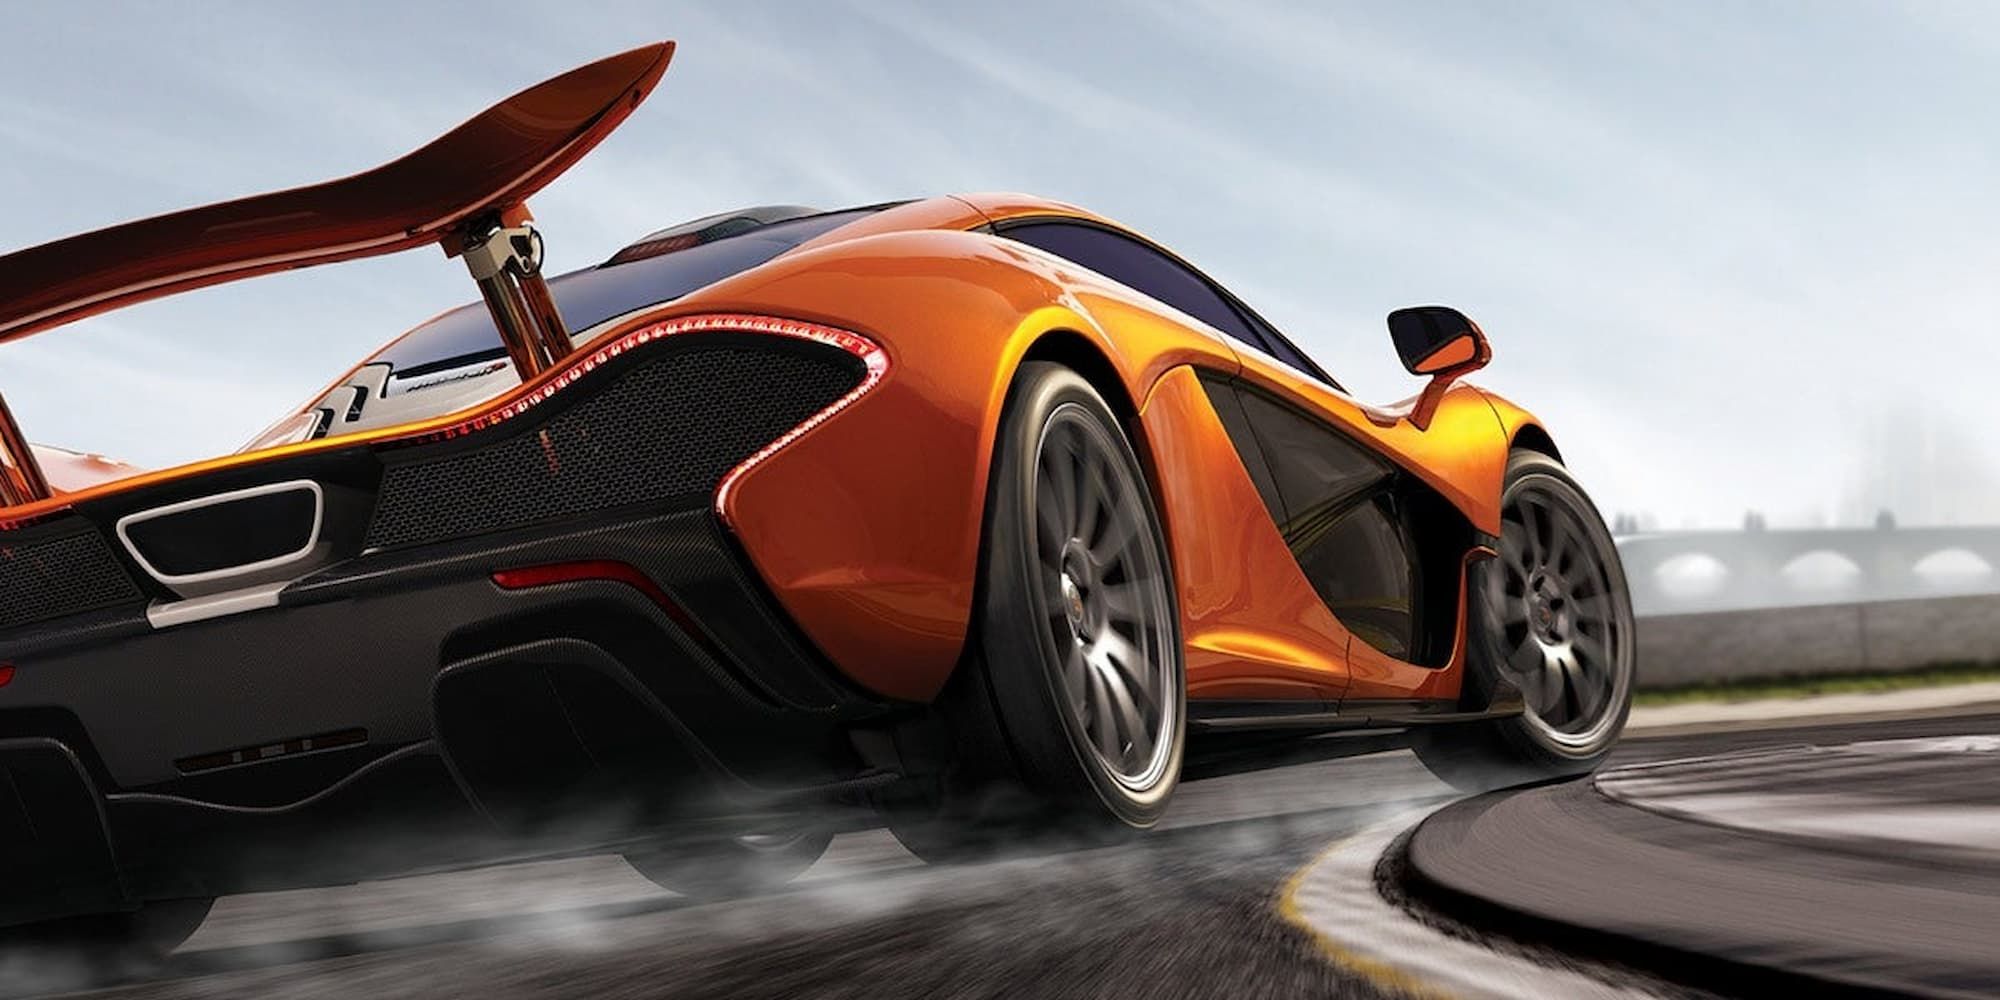 An orange car sends smoke from under its tires as it takes a turn in Forza Motorsport 5.